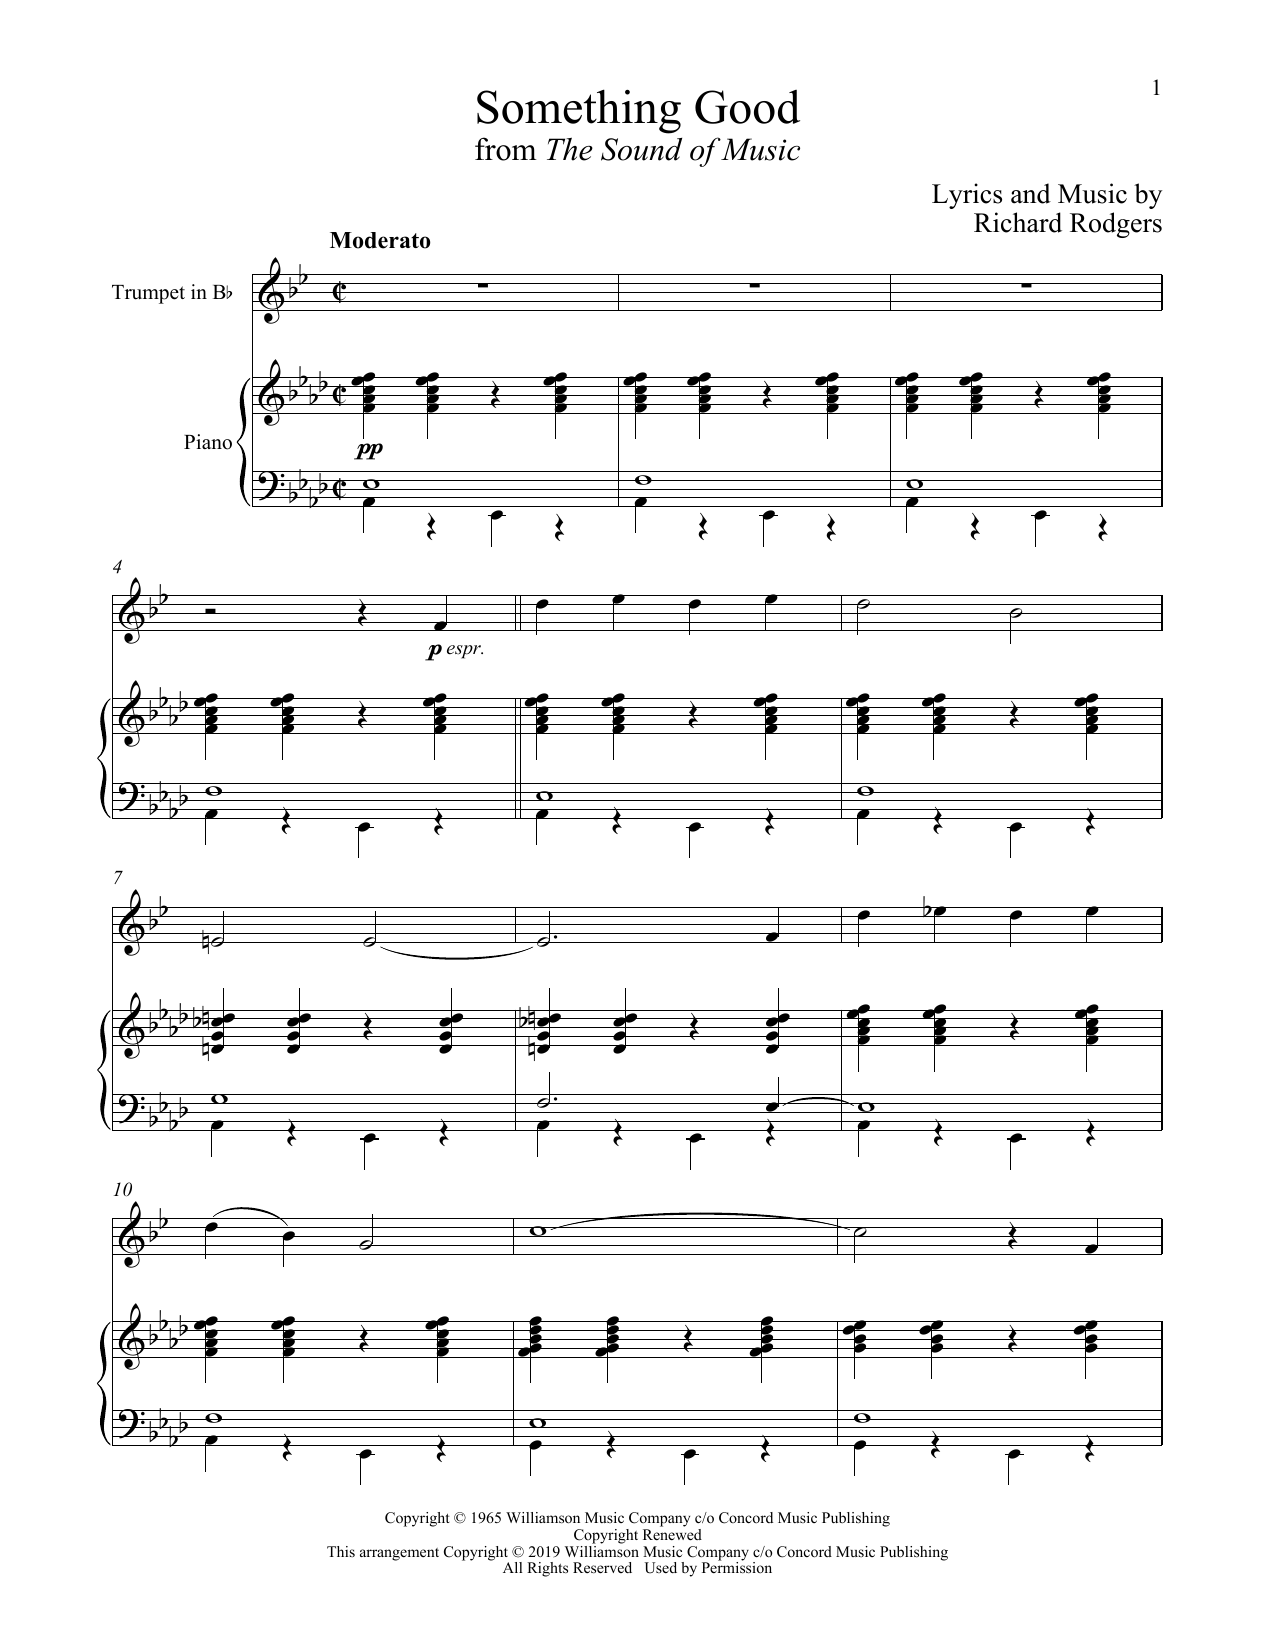 Download Rodgers & Hammerstein Something Good (from The Sound of Music Sheet Music